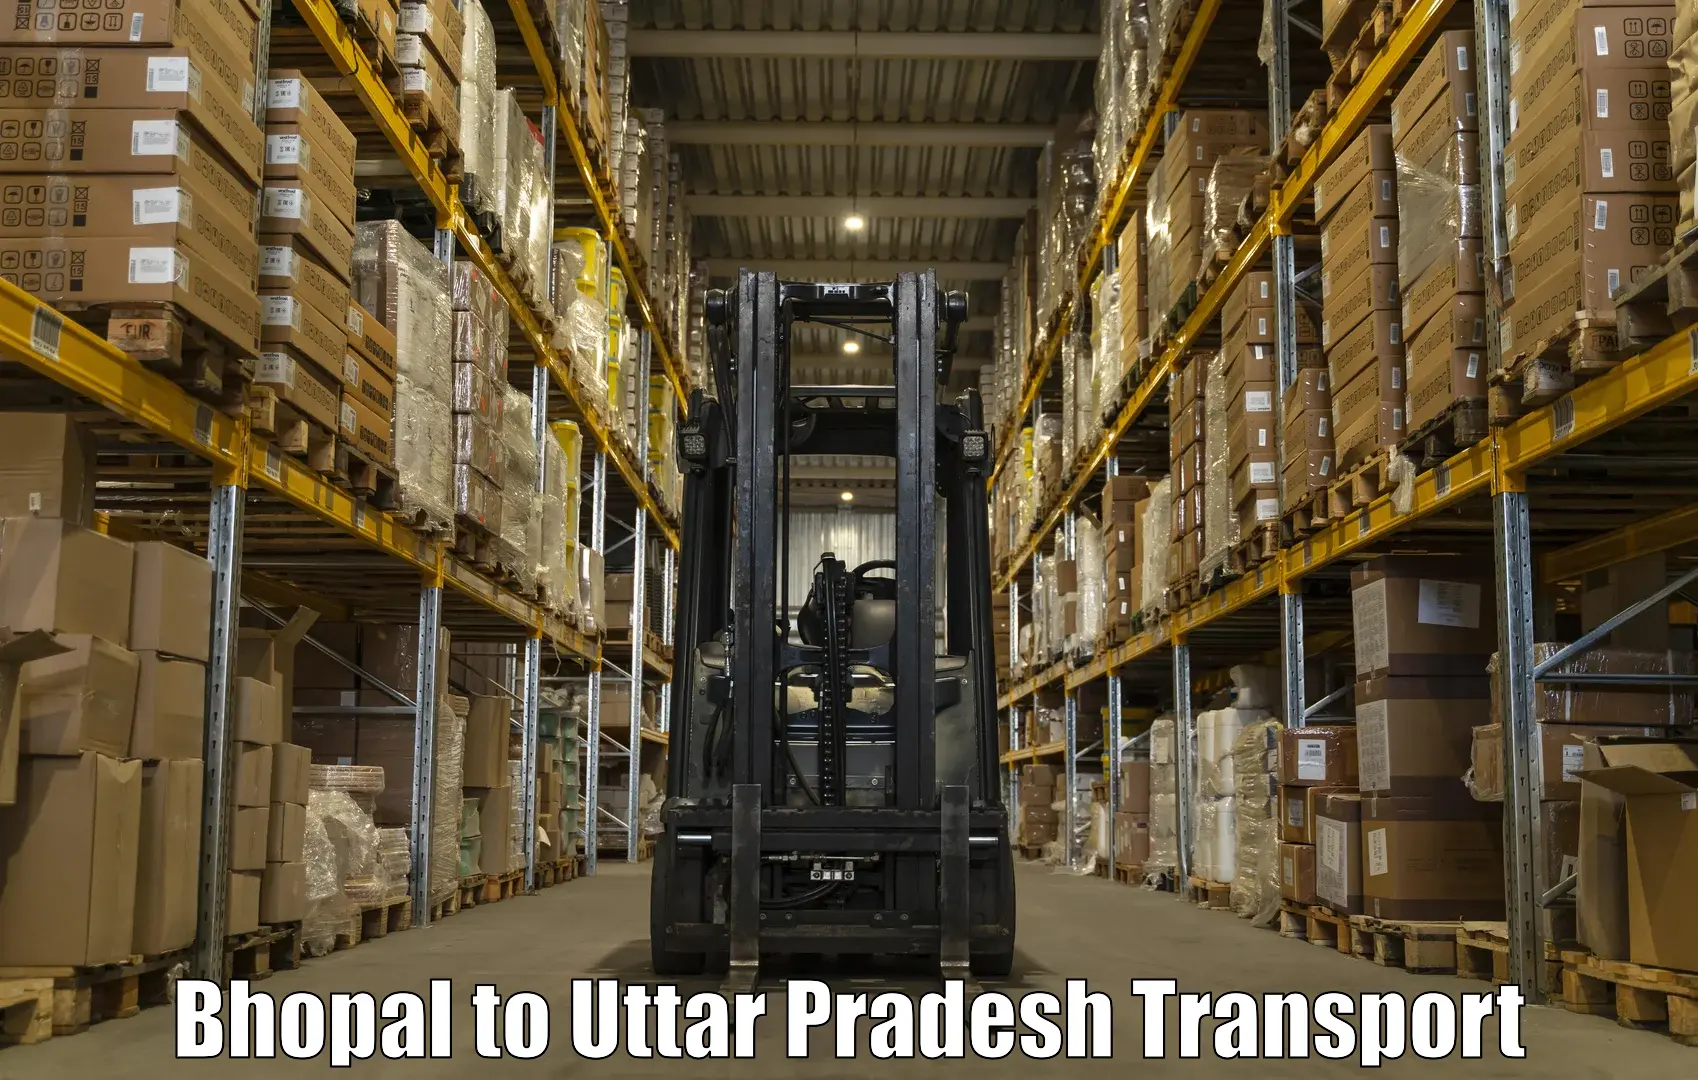 Part load transport service in India Bhopal to Banda